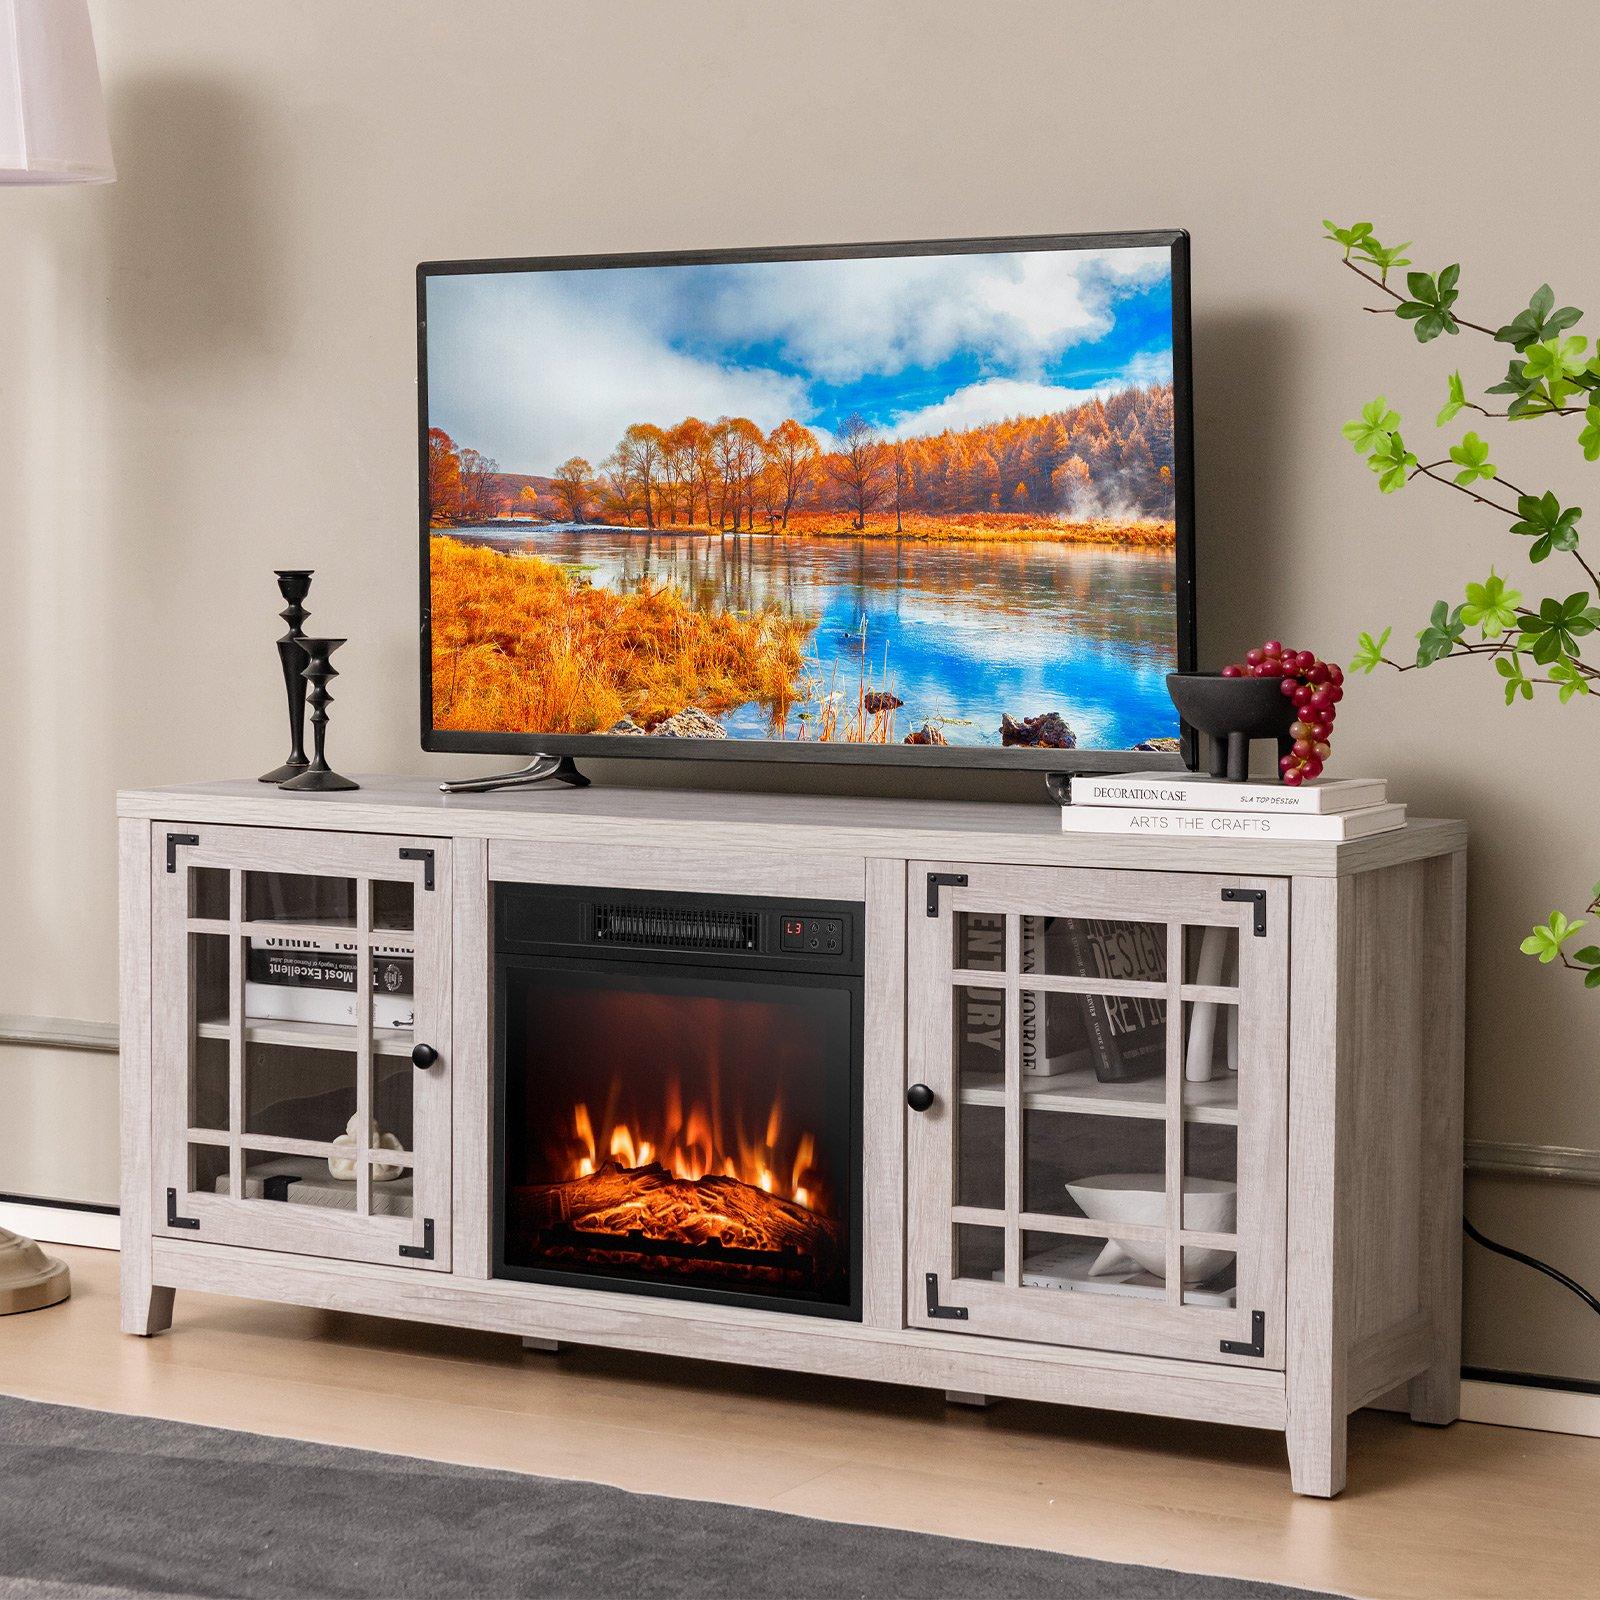 Fireplace TV Stand for TVs up to 65 Inches W/ 2000W Electric Fireplace Insert